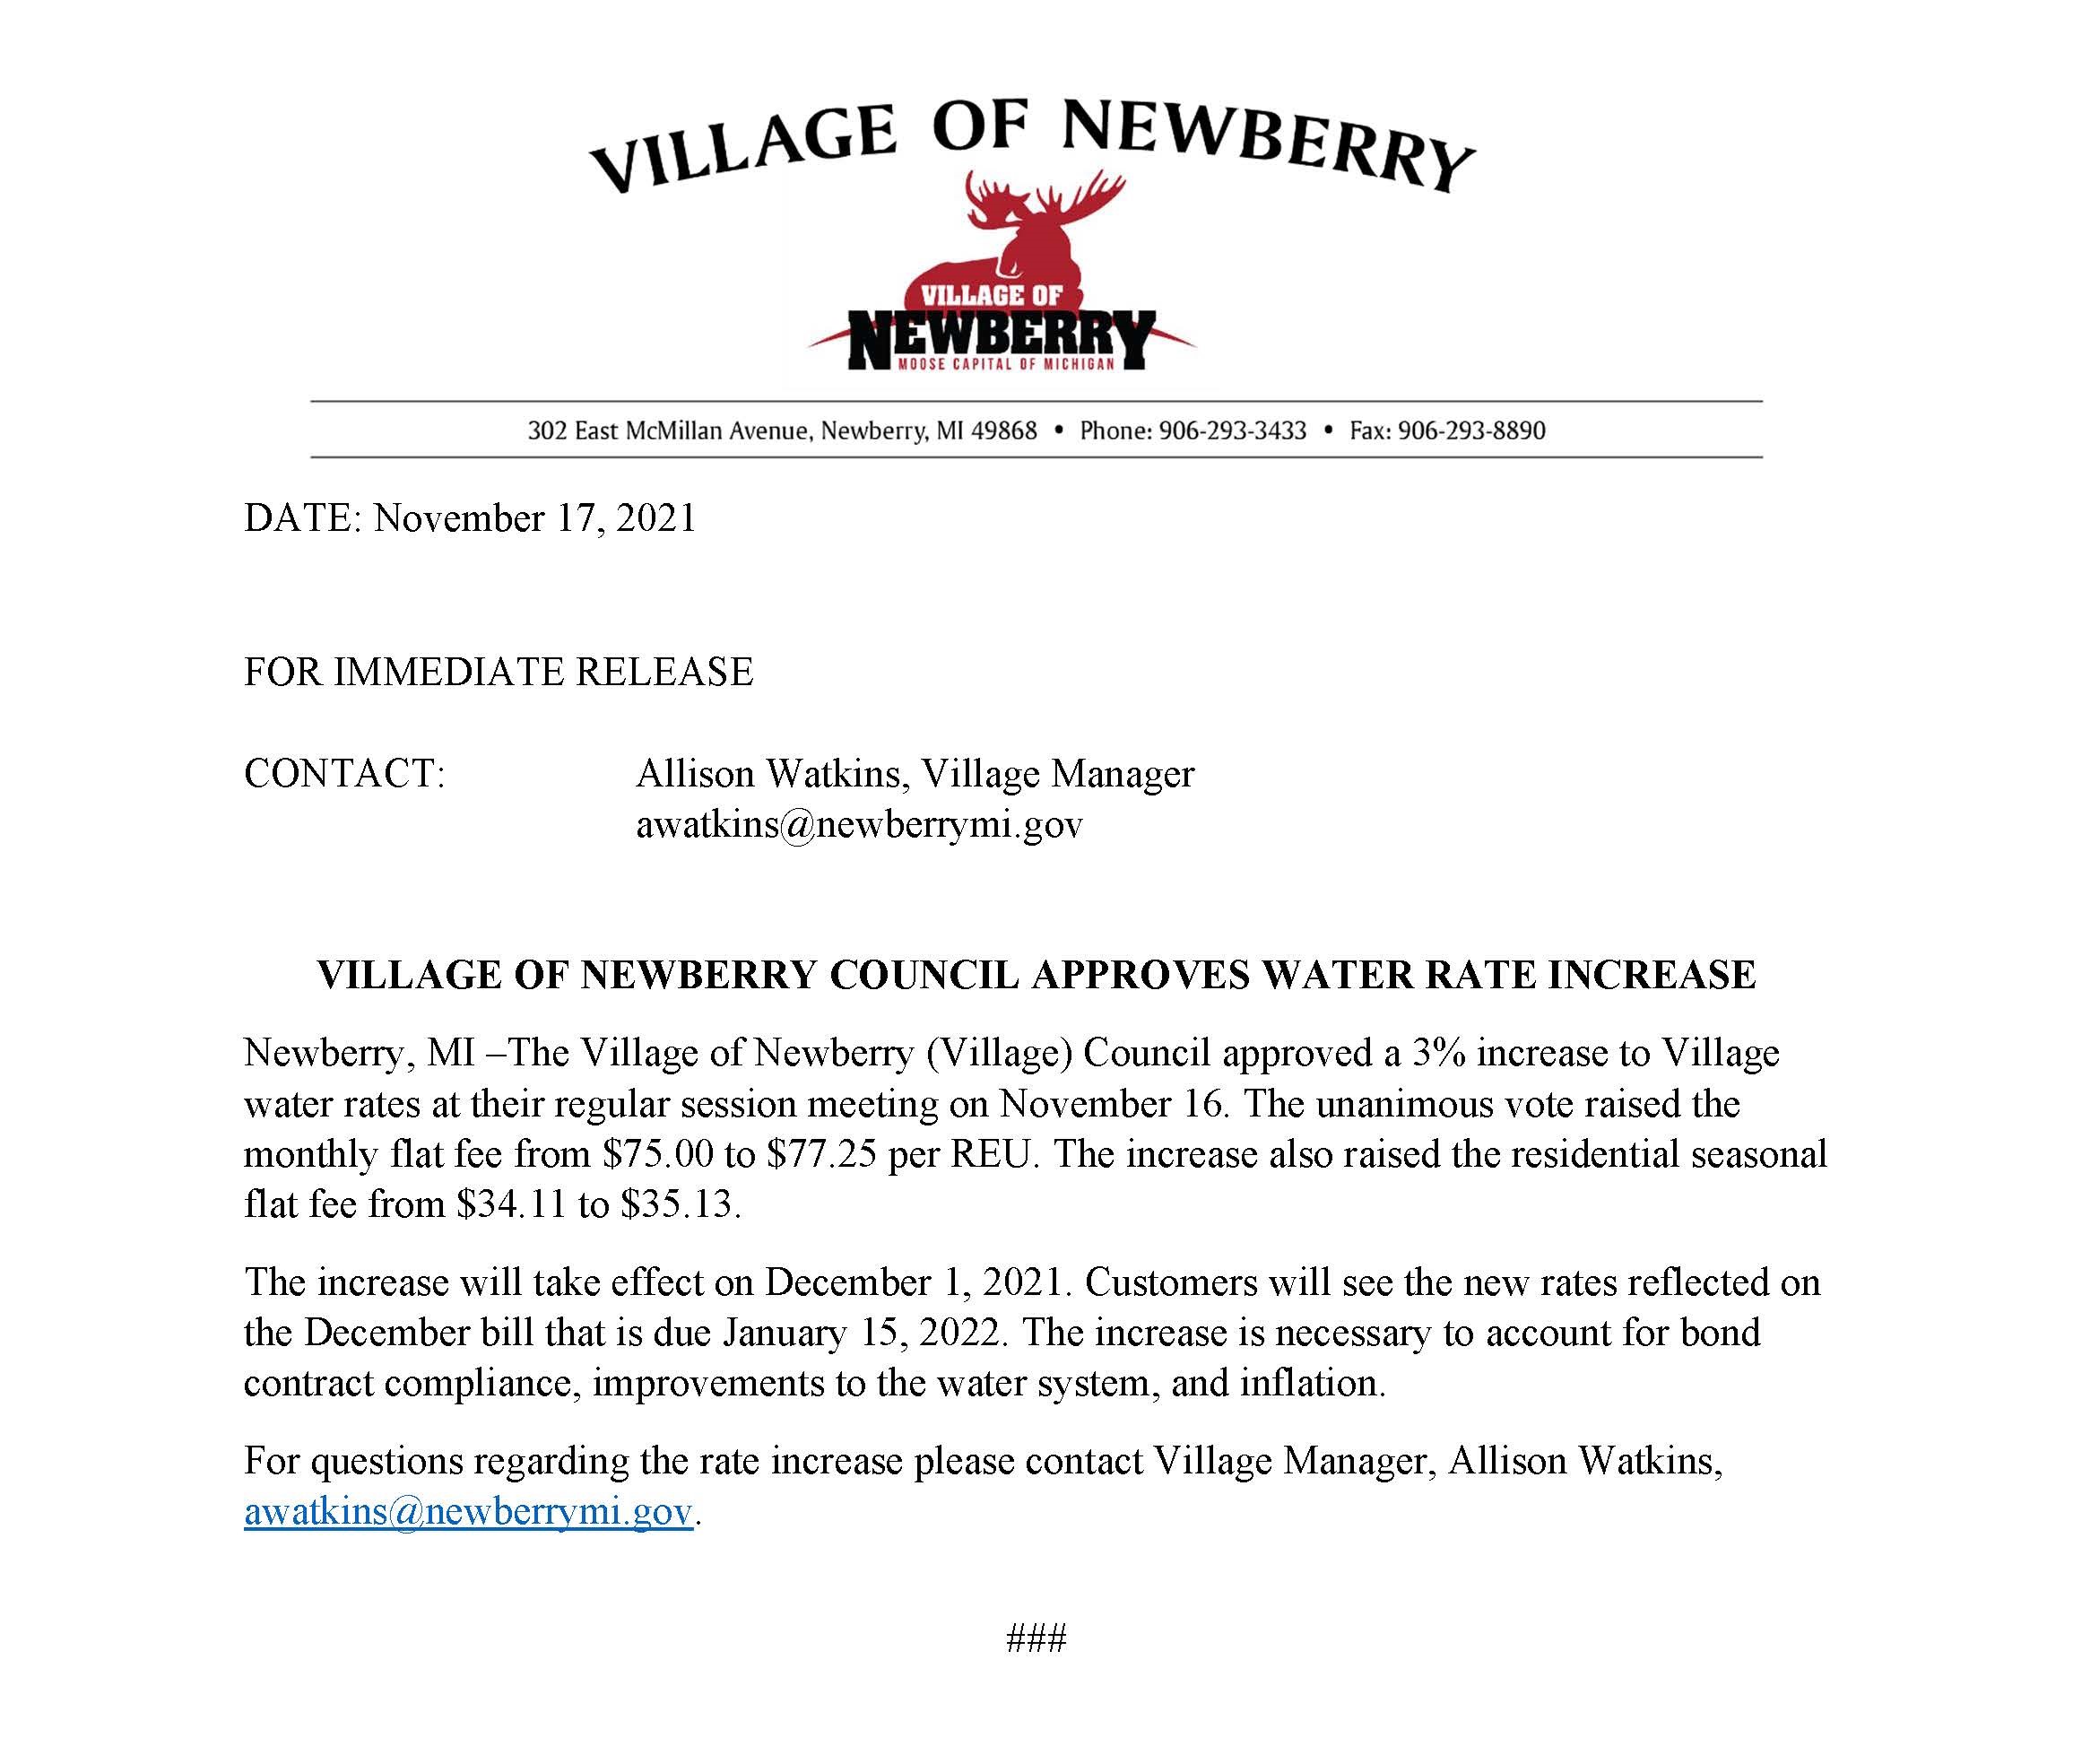 Press Release -  Water Rate Increase Approved